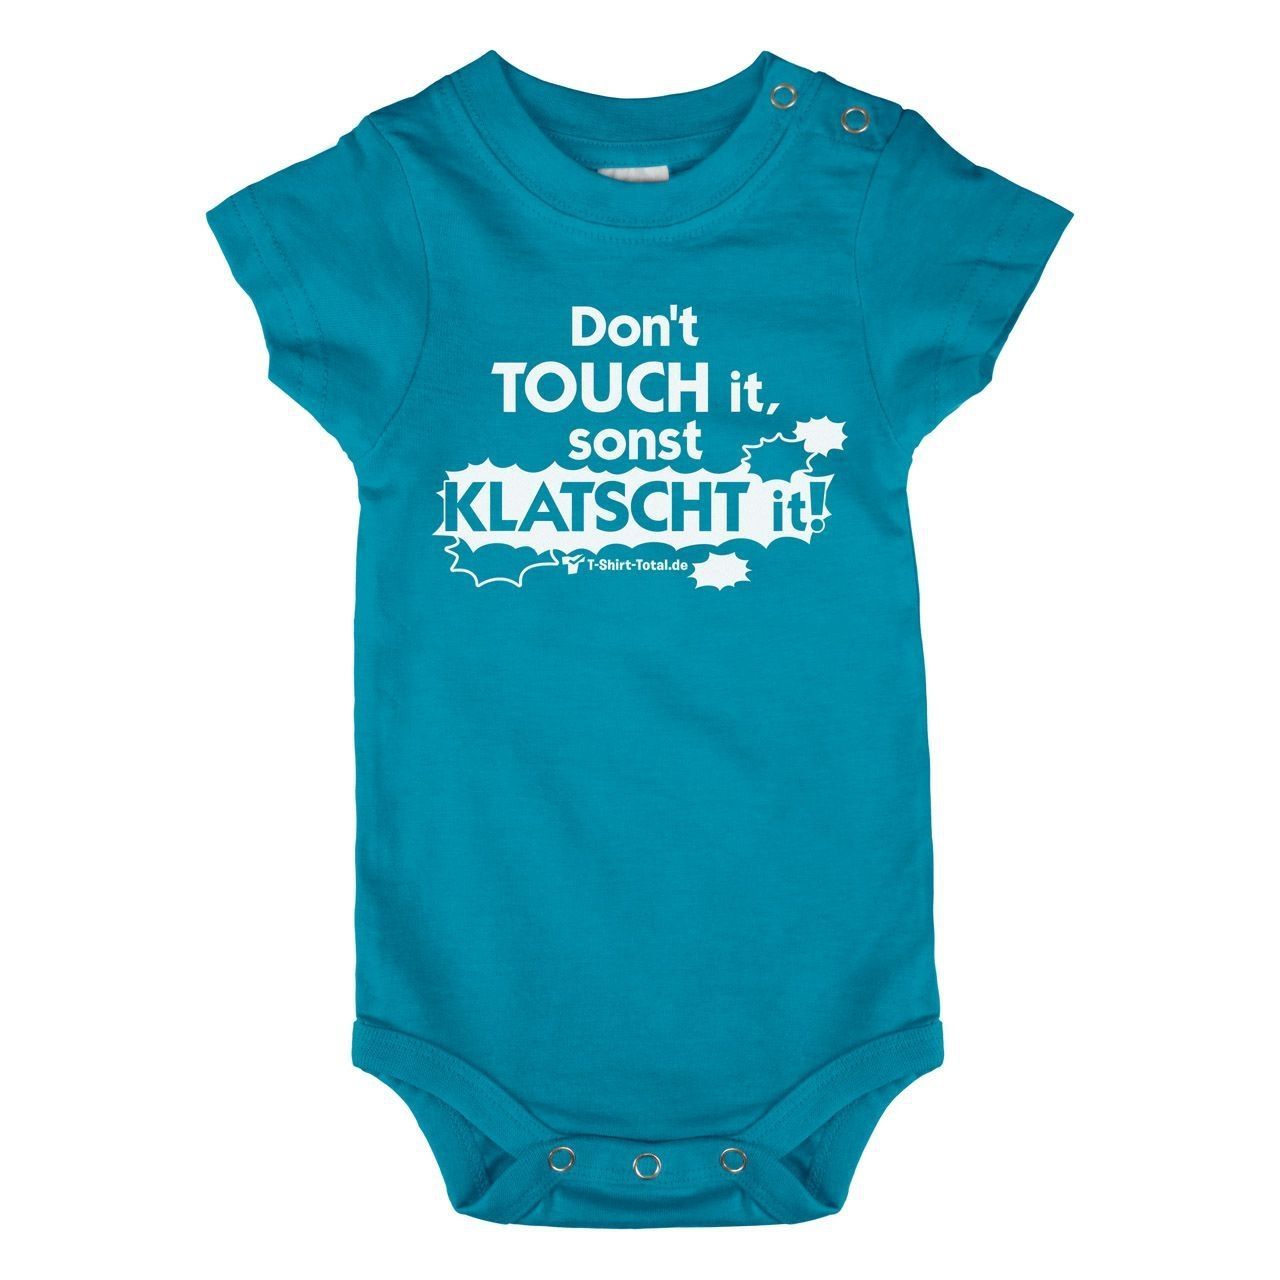 Dont touch it Baby Body Kurzarm türkis 56 / 62